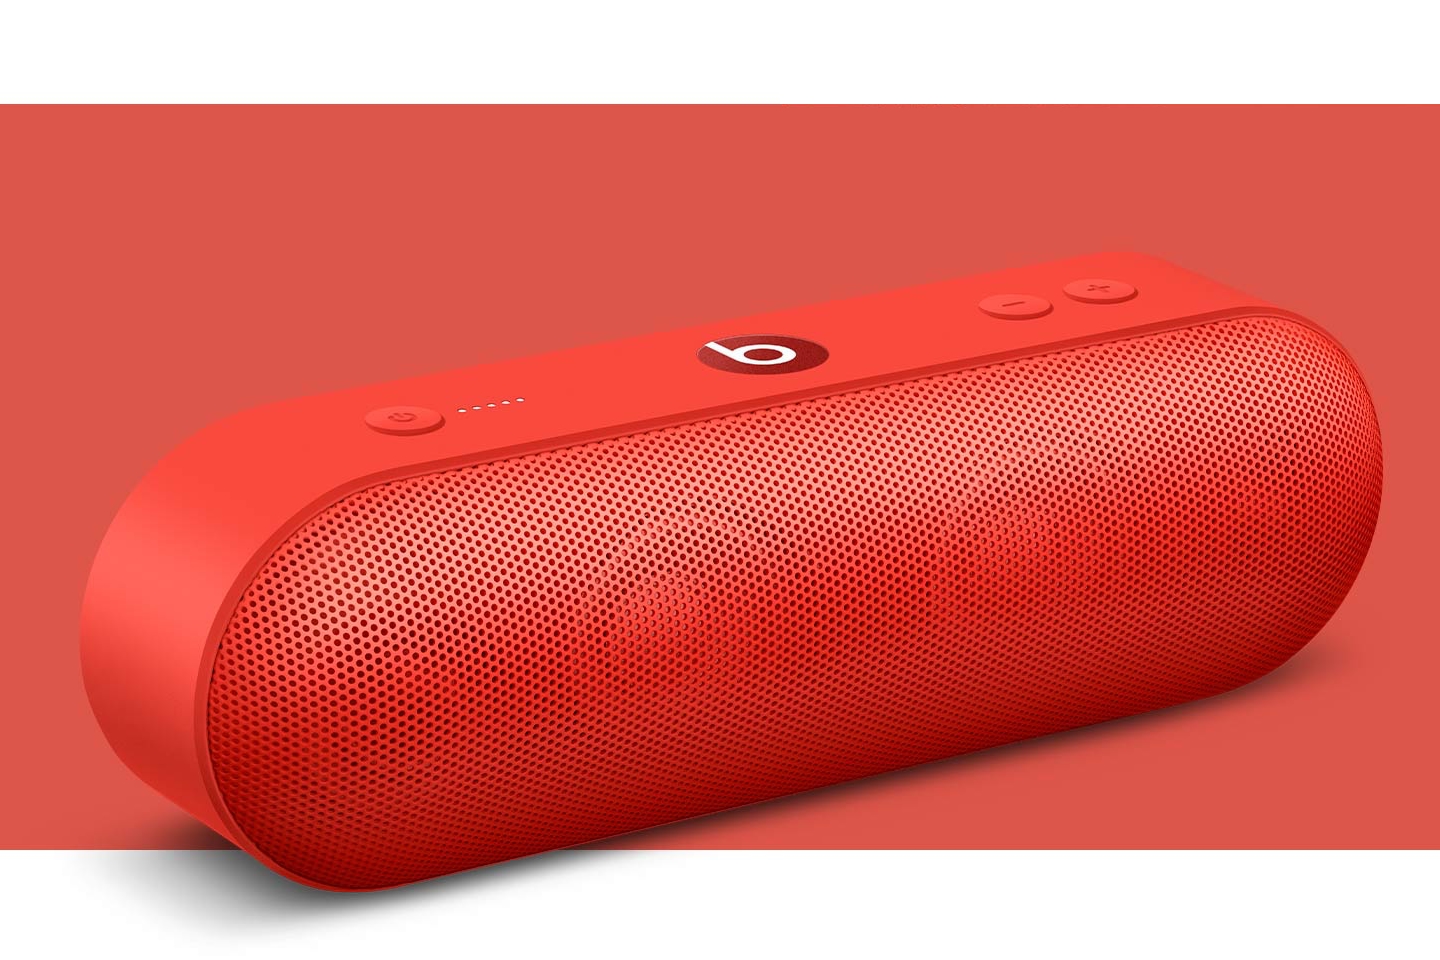 Apple discontinues its only portable speaker